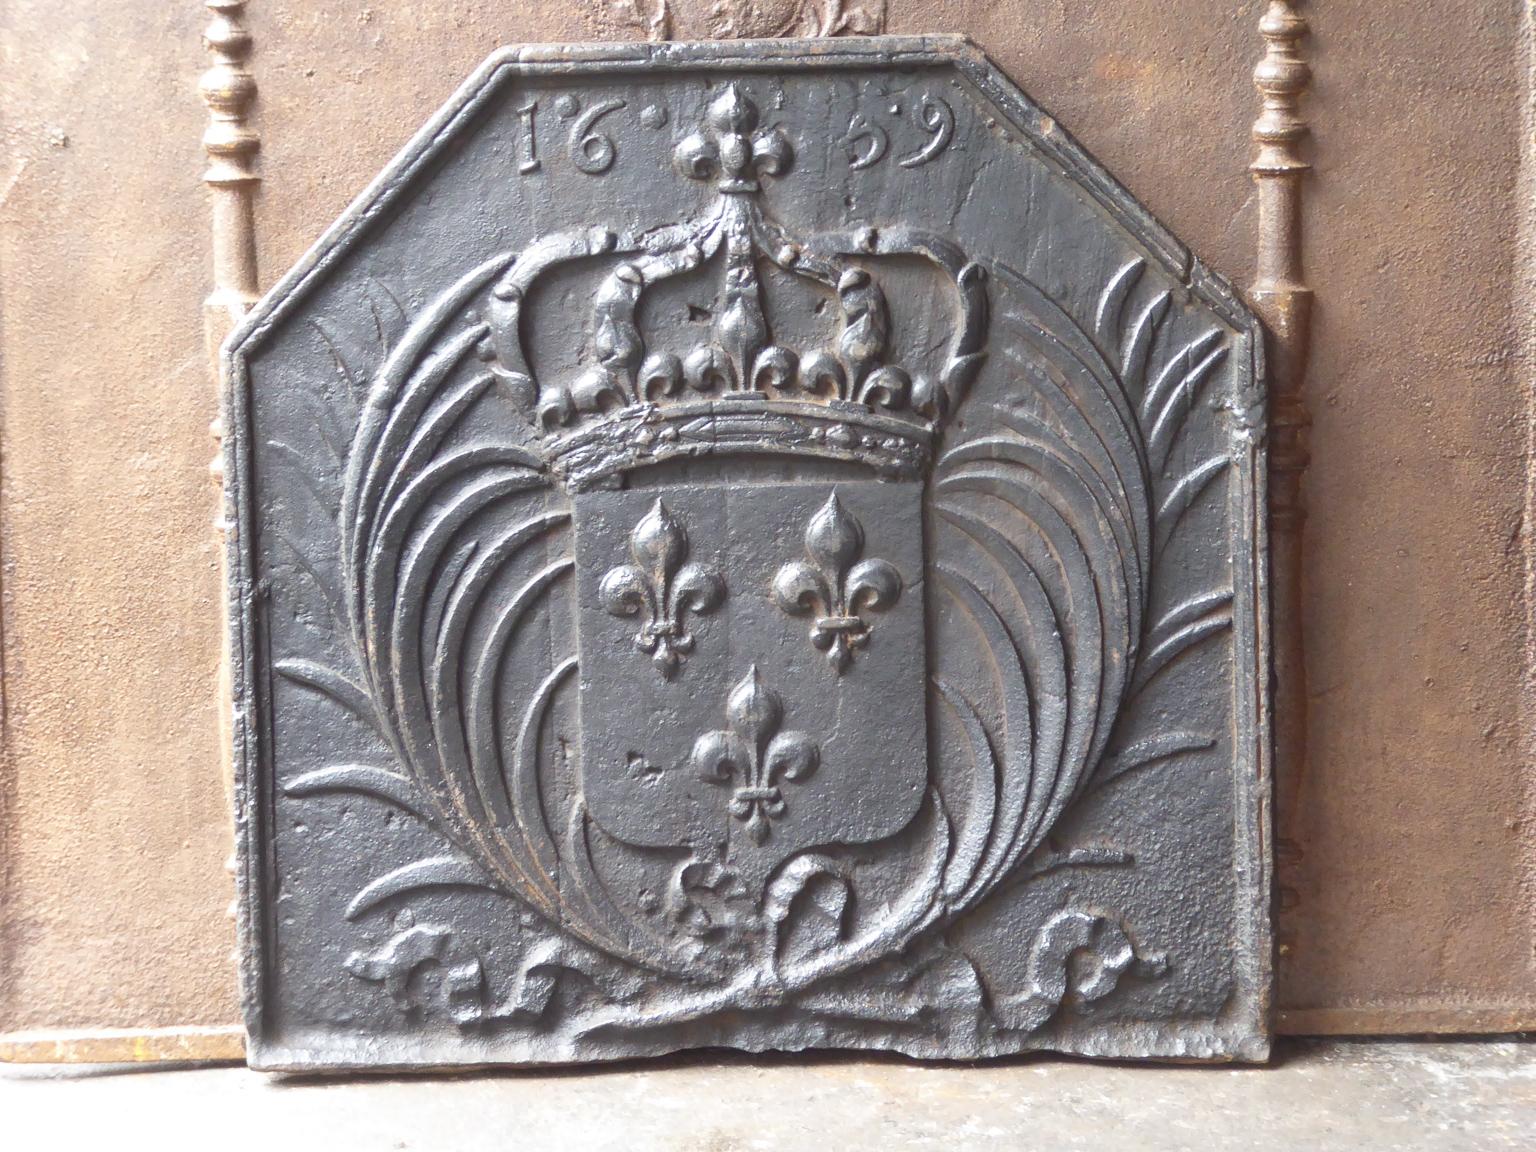 17th century French Louis XIV fireback with the arms of France. This is the coat of arms of the House of Bourbon, an originally French royal house that became a major dynasty in Europe. It delivered kings for Spain (Navarra), France, both Sicilies